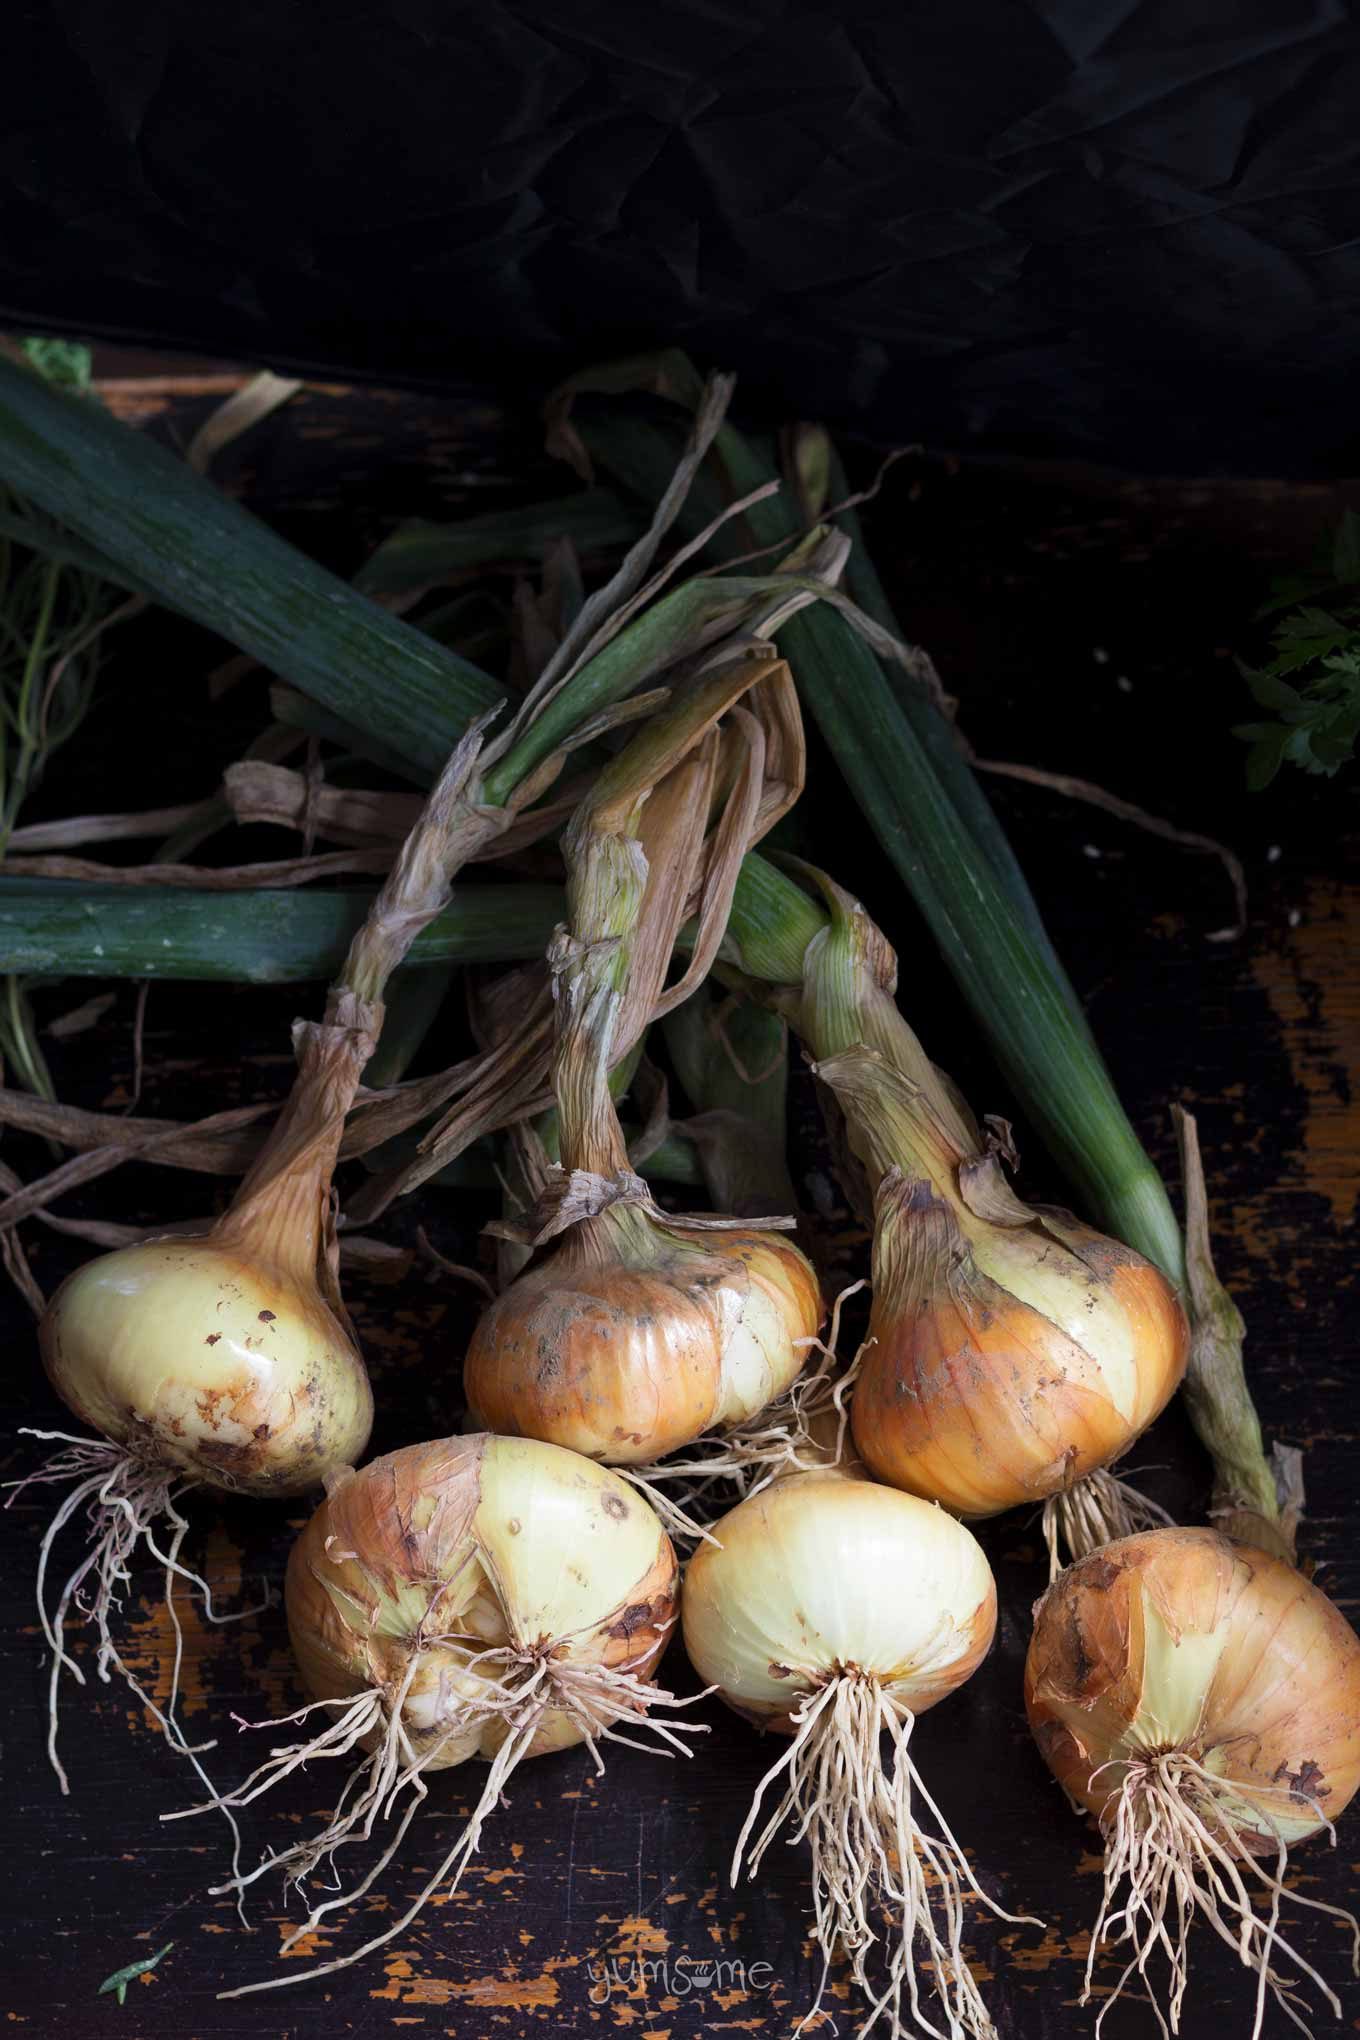 A bunch of fresh onions from the garden, against a black background.